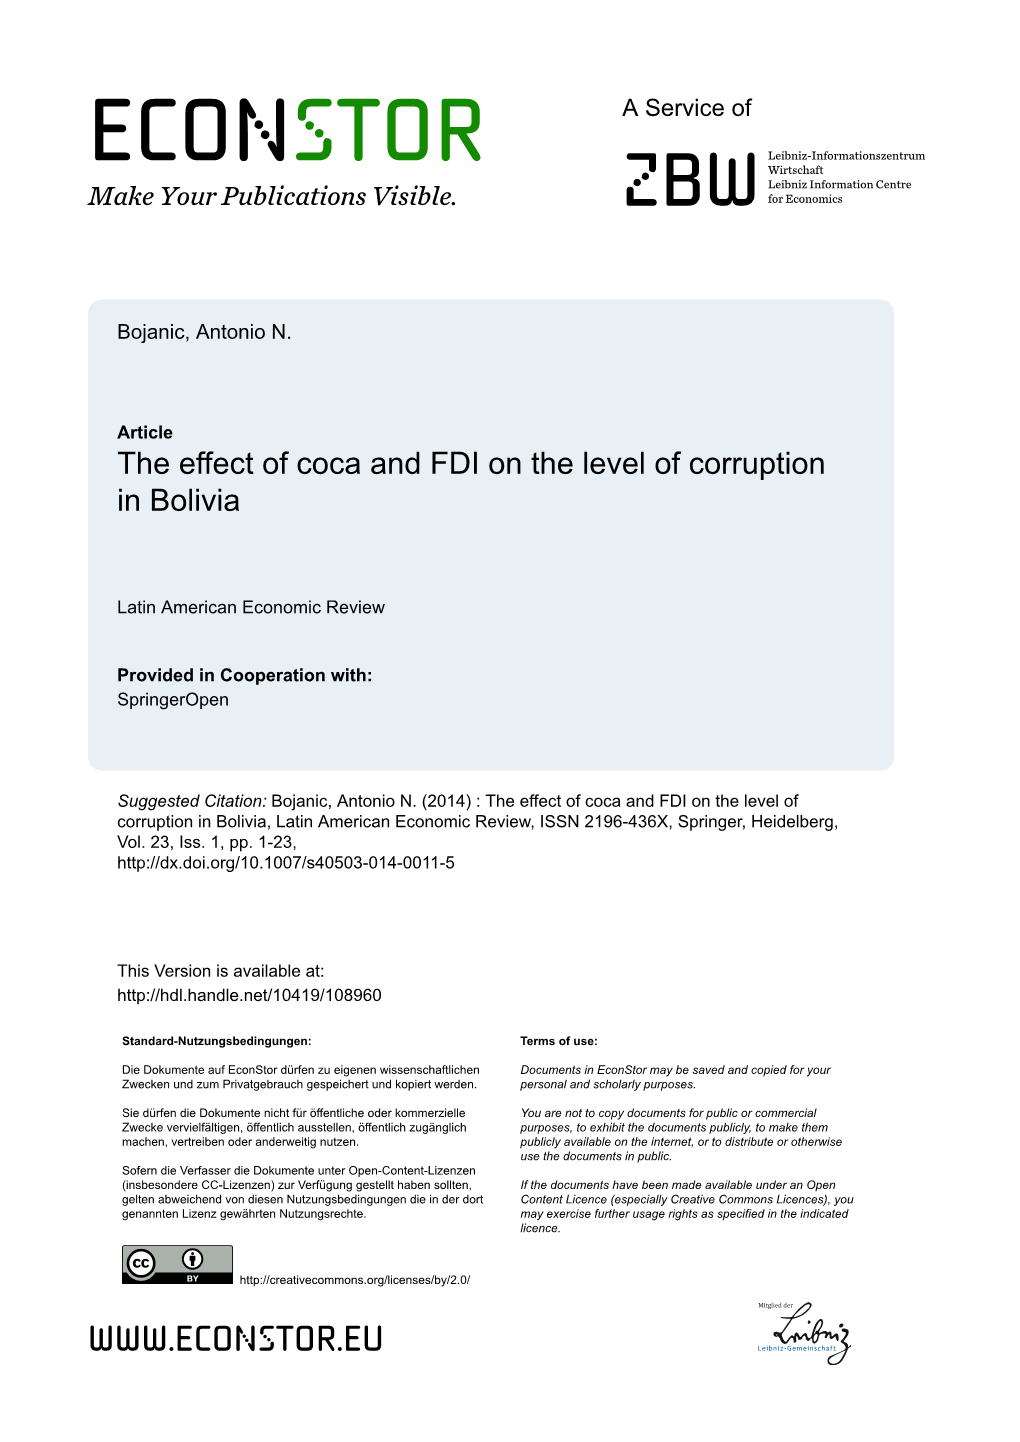 The Effect of Coca and FDI on the Level of Corruption in Bolivia